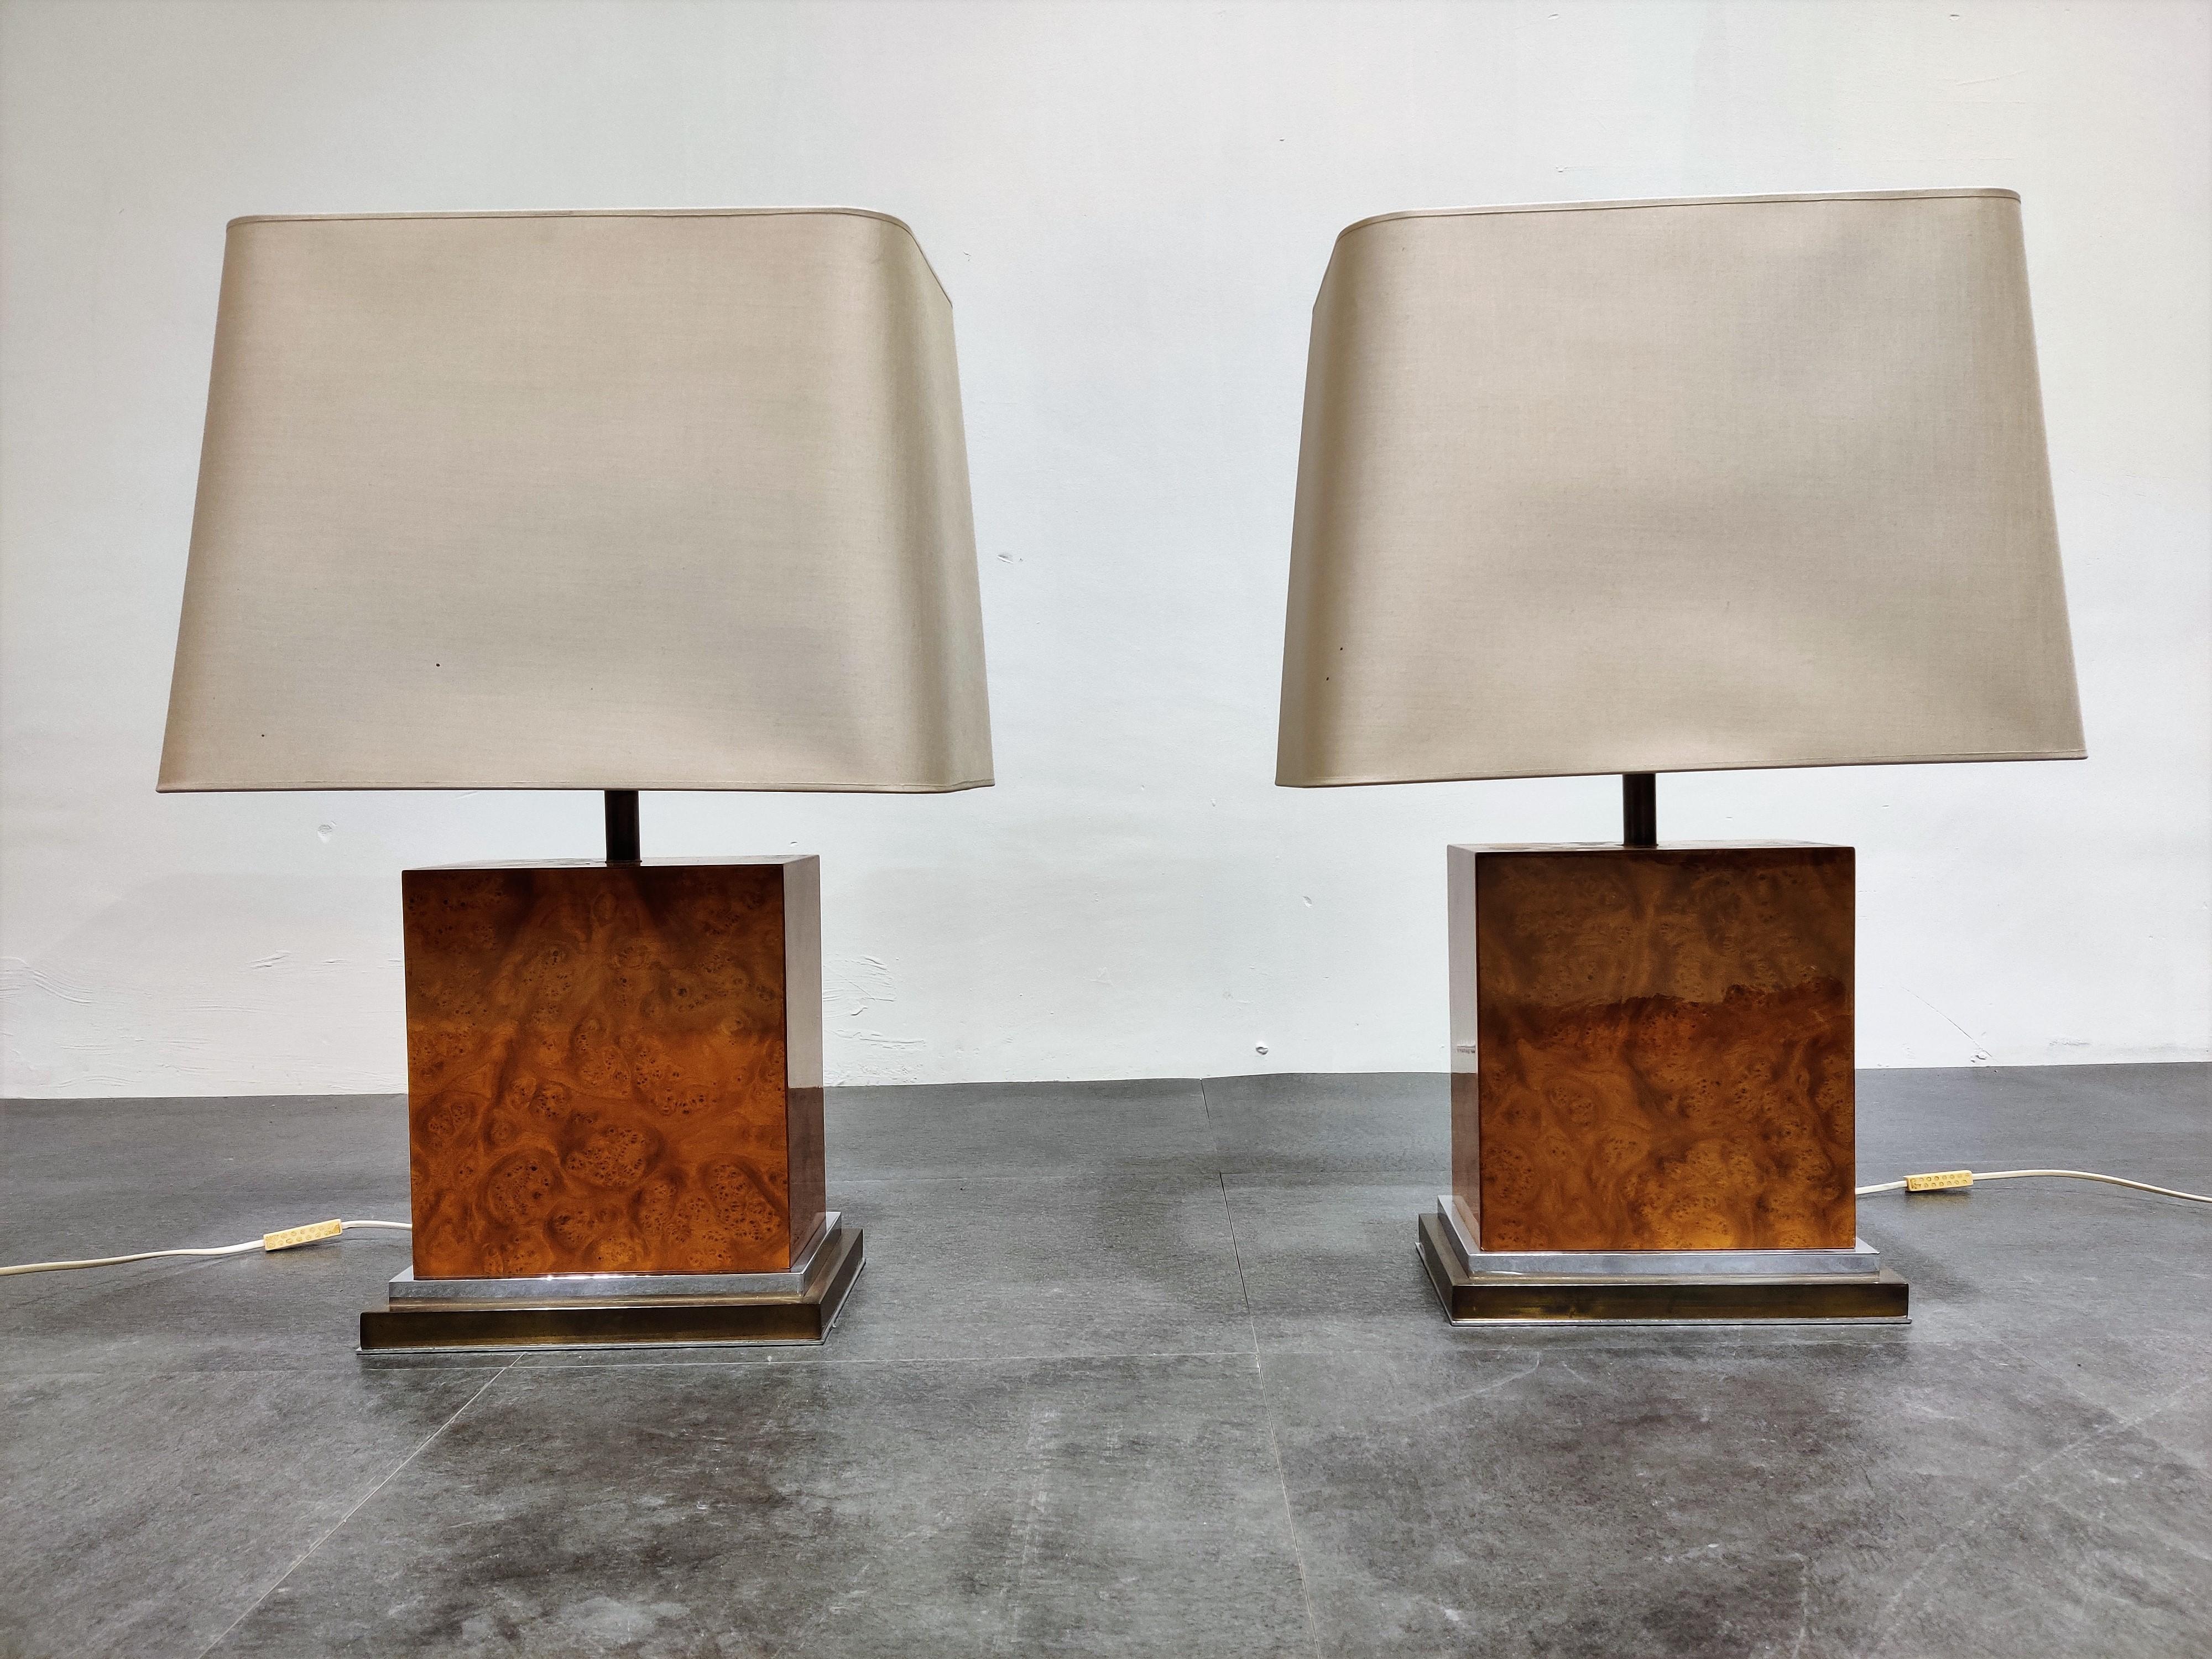 Pair of stunning burl wooden table lamps table lamps by Jean Claude Mahey.

Burl wood mounted on a brass and chrome base with new white lamp shades.

Tested and ready to use with a regular E27 light bulb.

1970s, France

Dimensions:
With